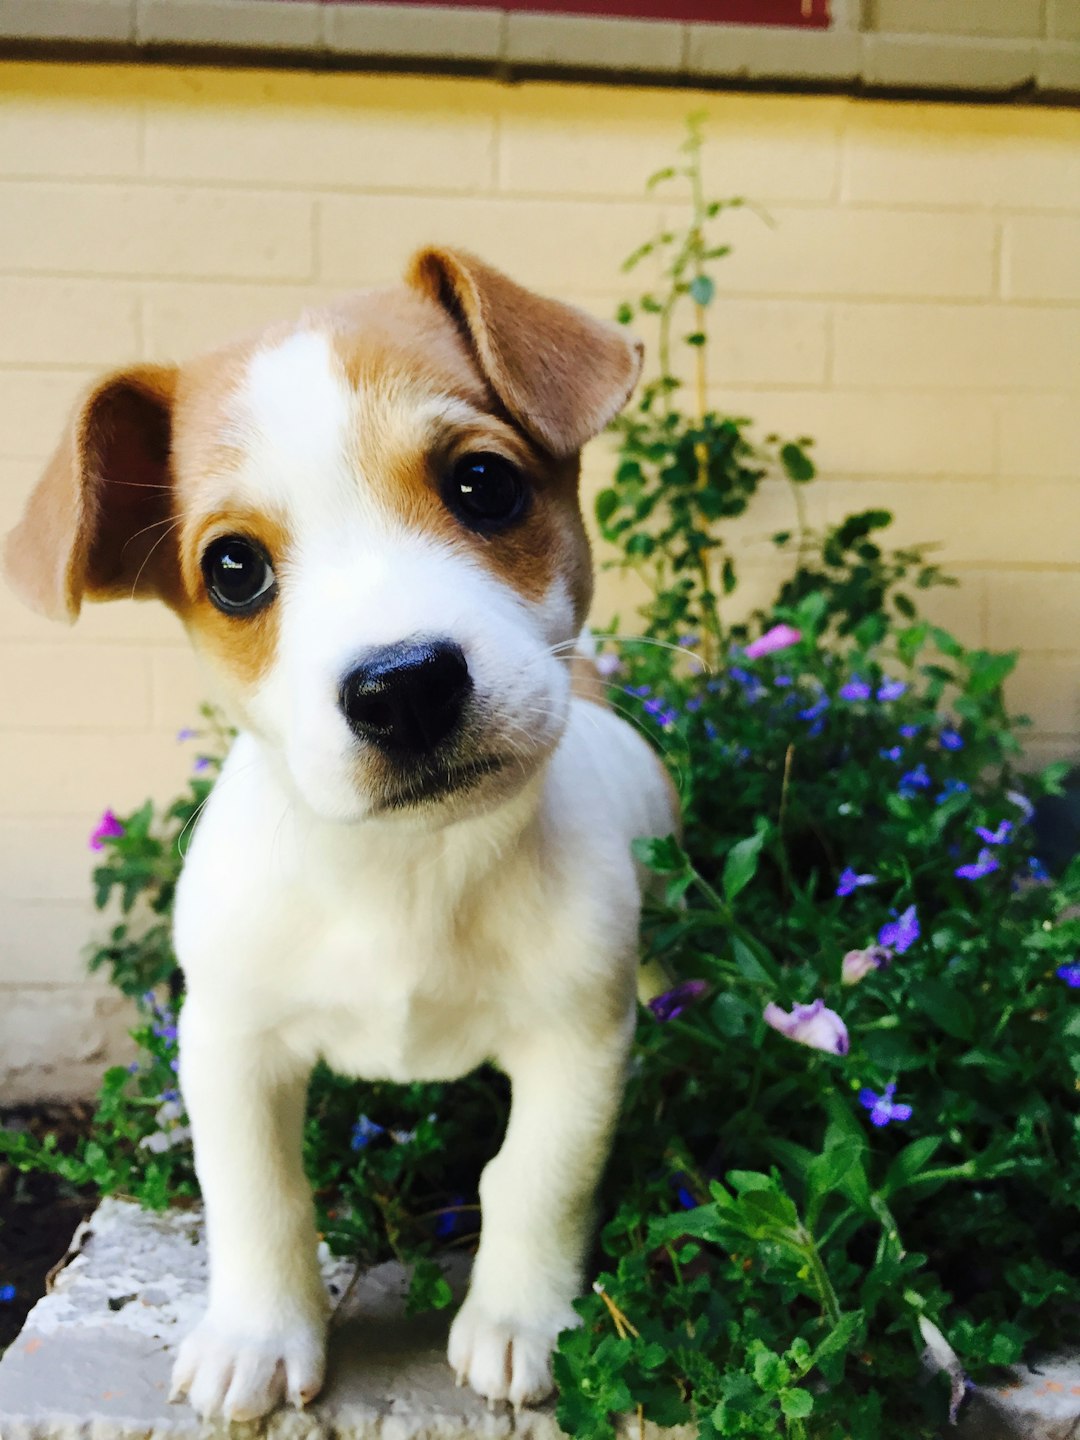 Adorable puppy in the flowers